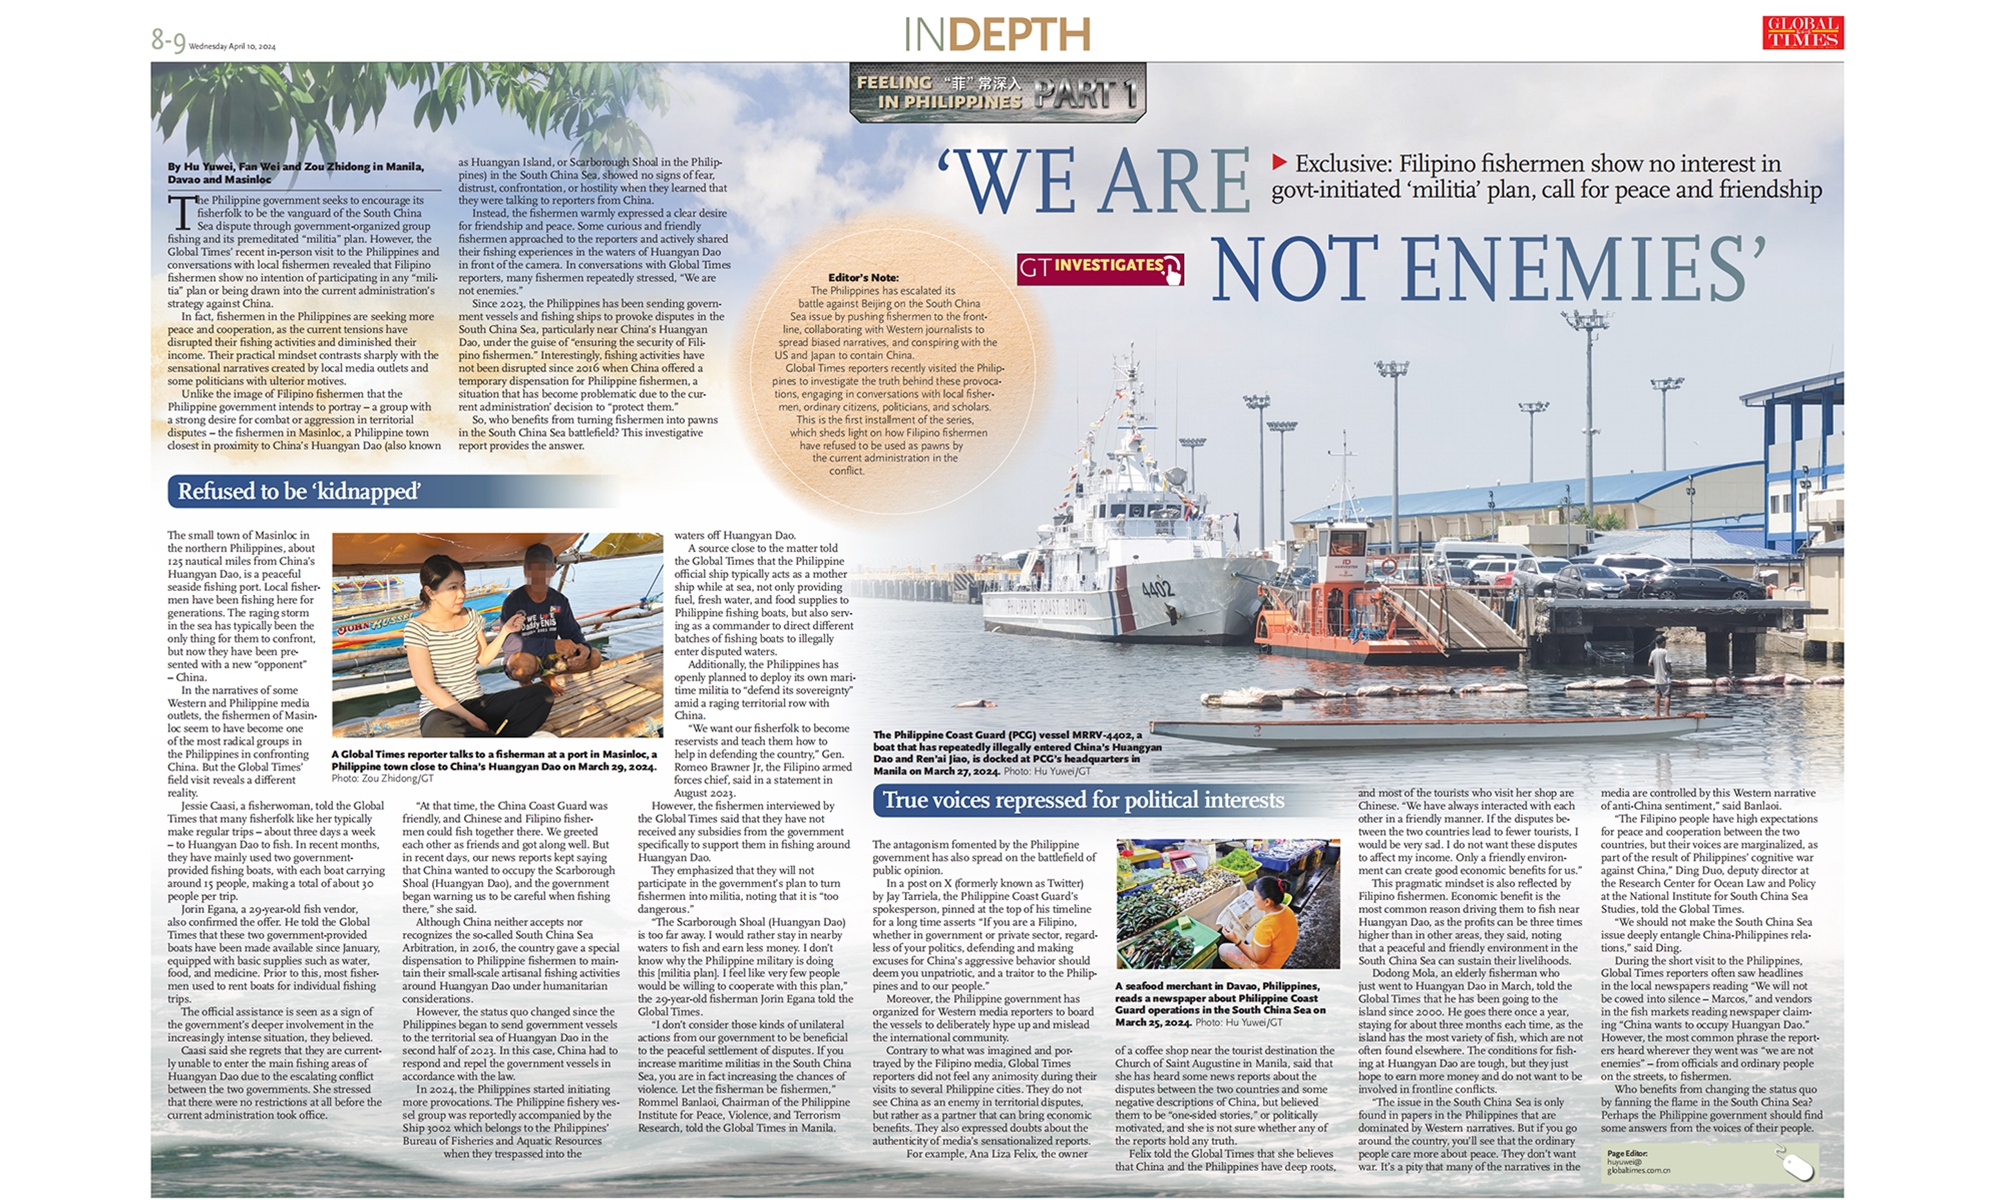 GT exclusive: Filipino fishermen show no interest in govt-initiated 'militia' plan, call for peace and friendship